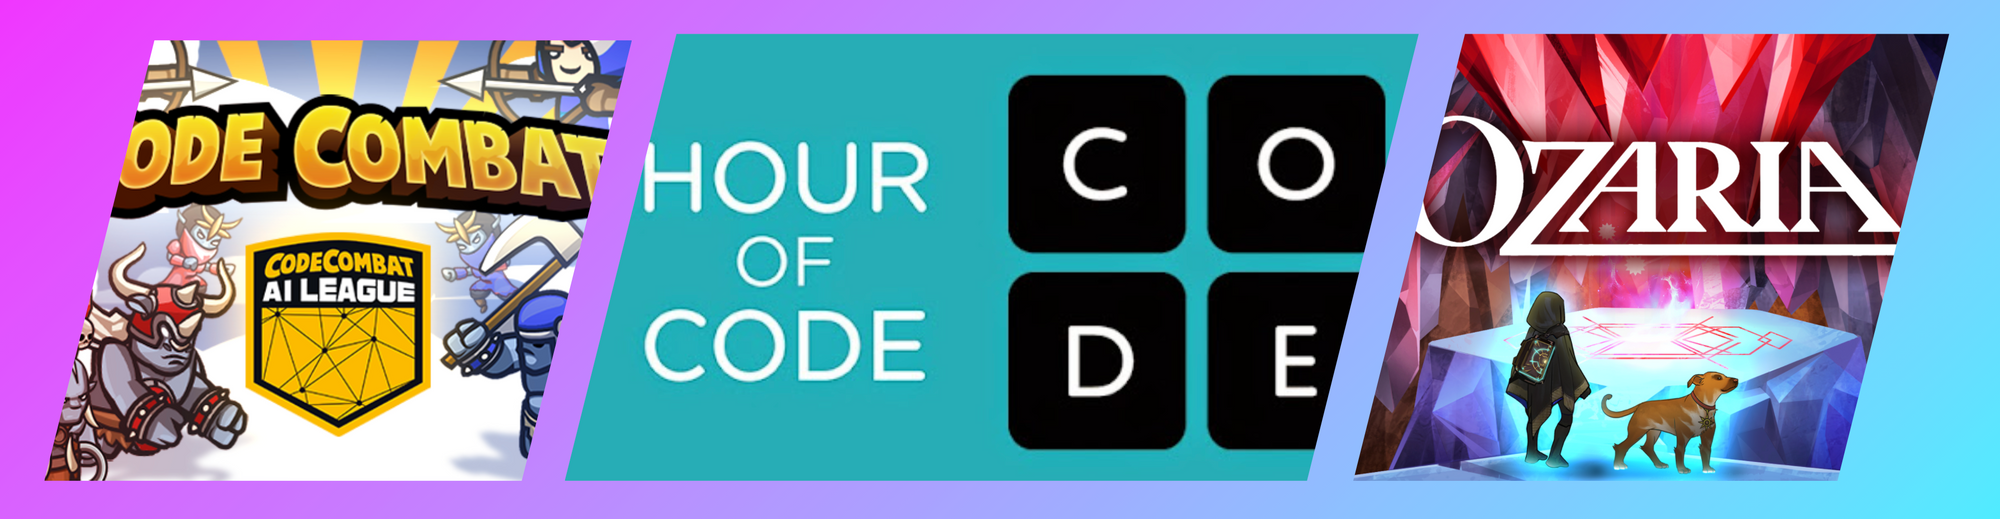 2021 Hour of Code Activities that Engage Students and Celebrate DEI